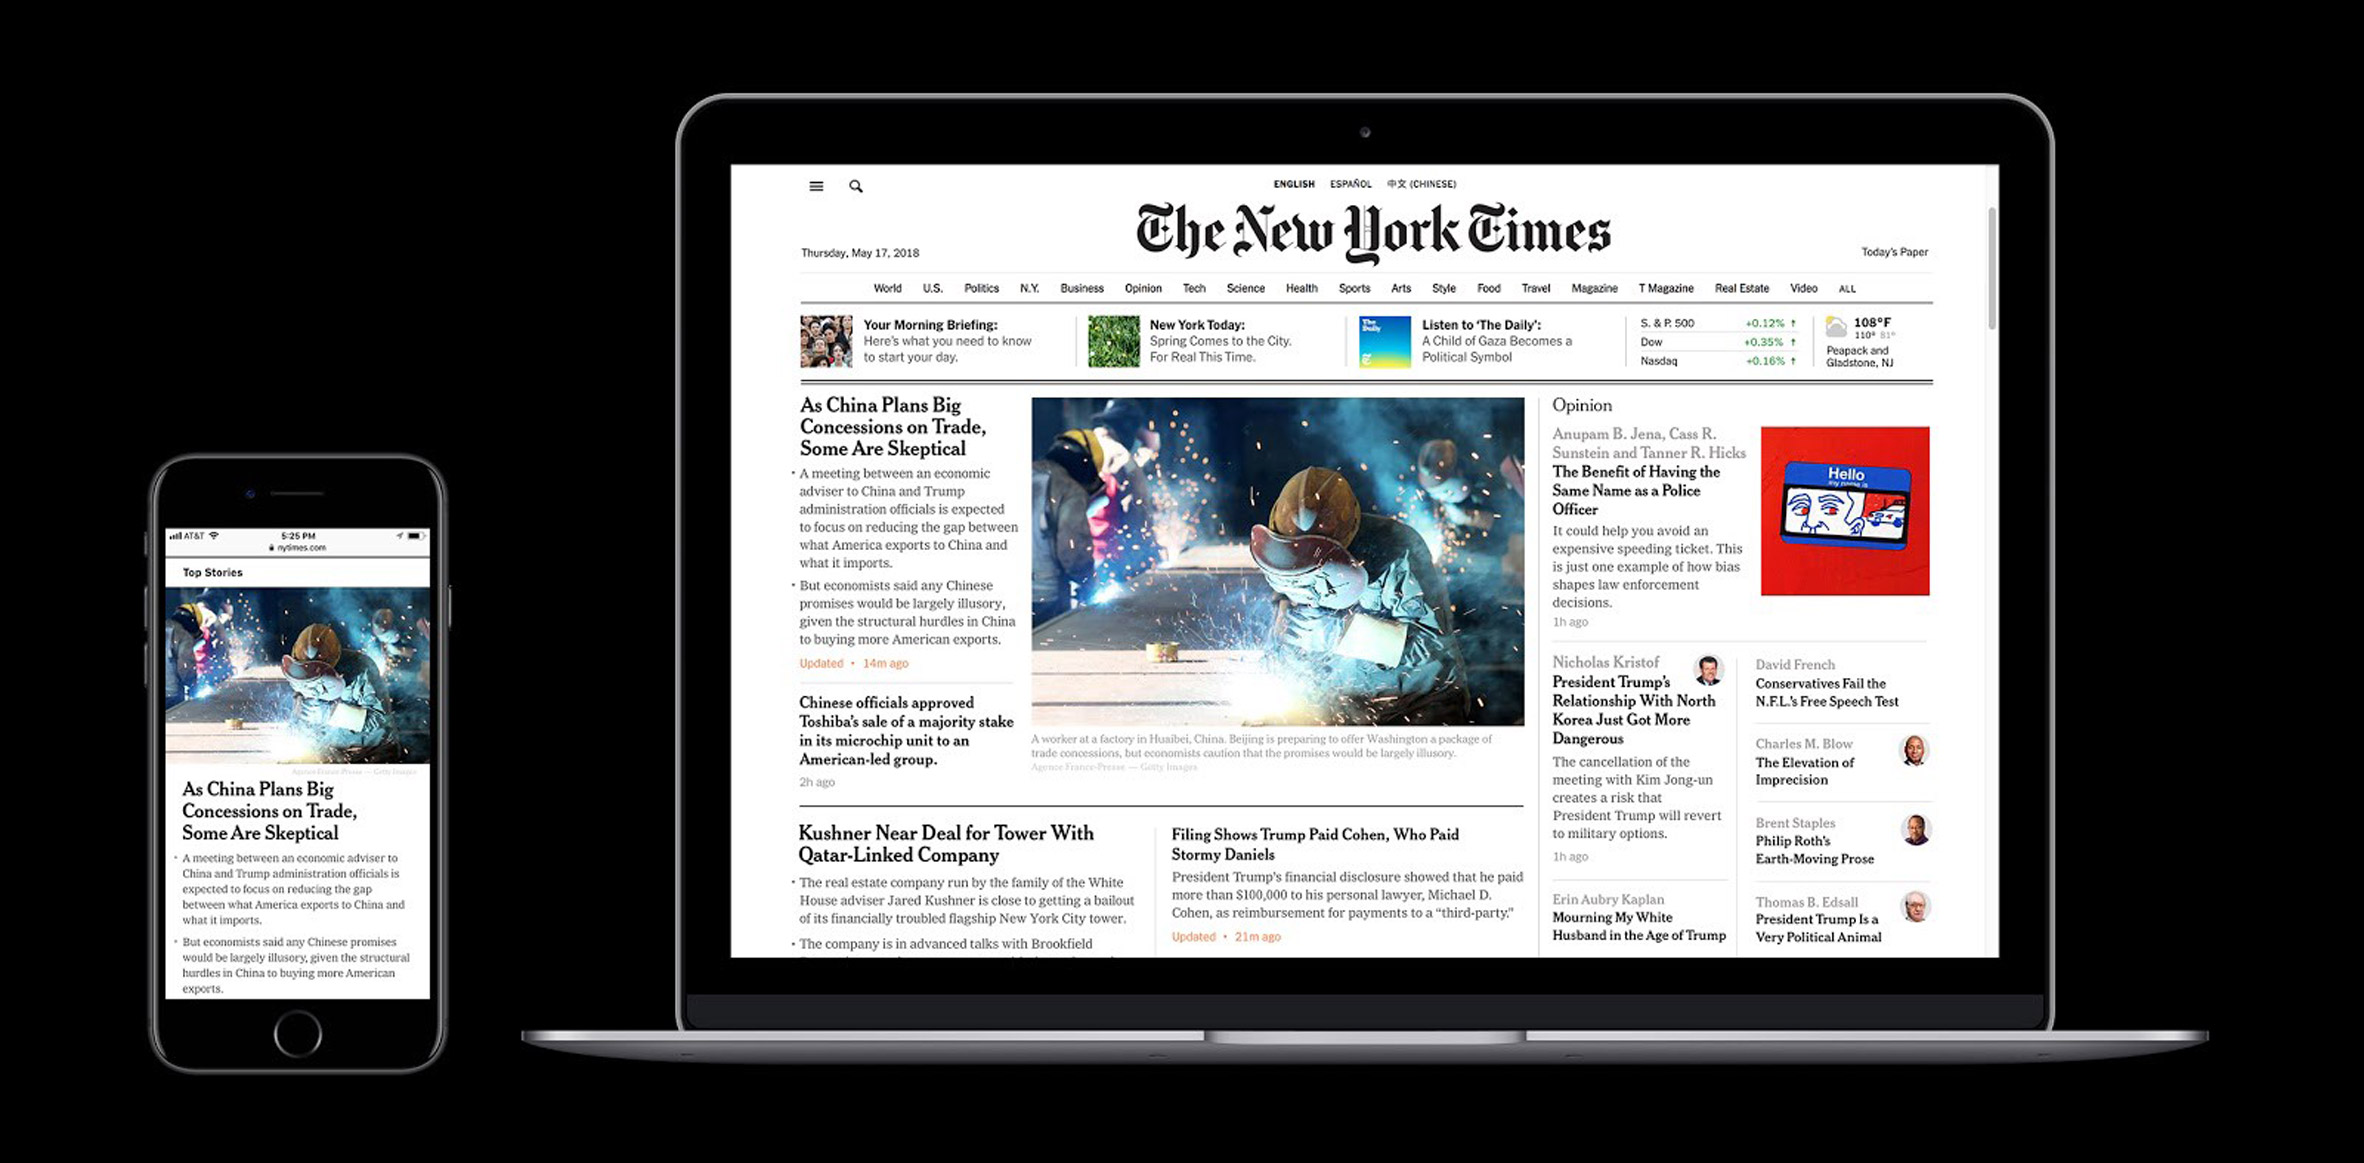 New York Times redesigns website to catch up with mobile offering